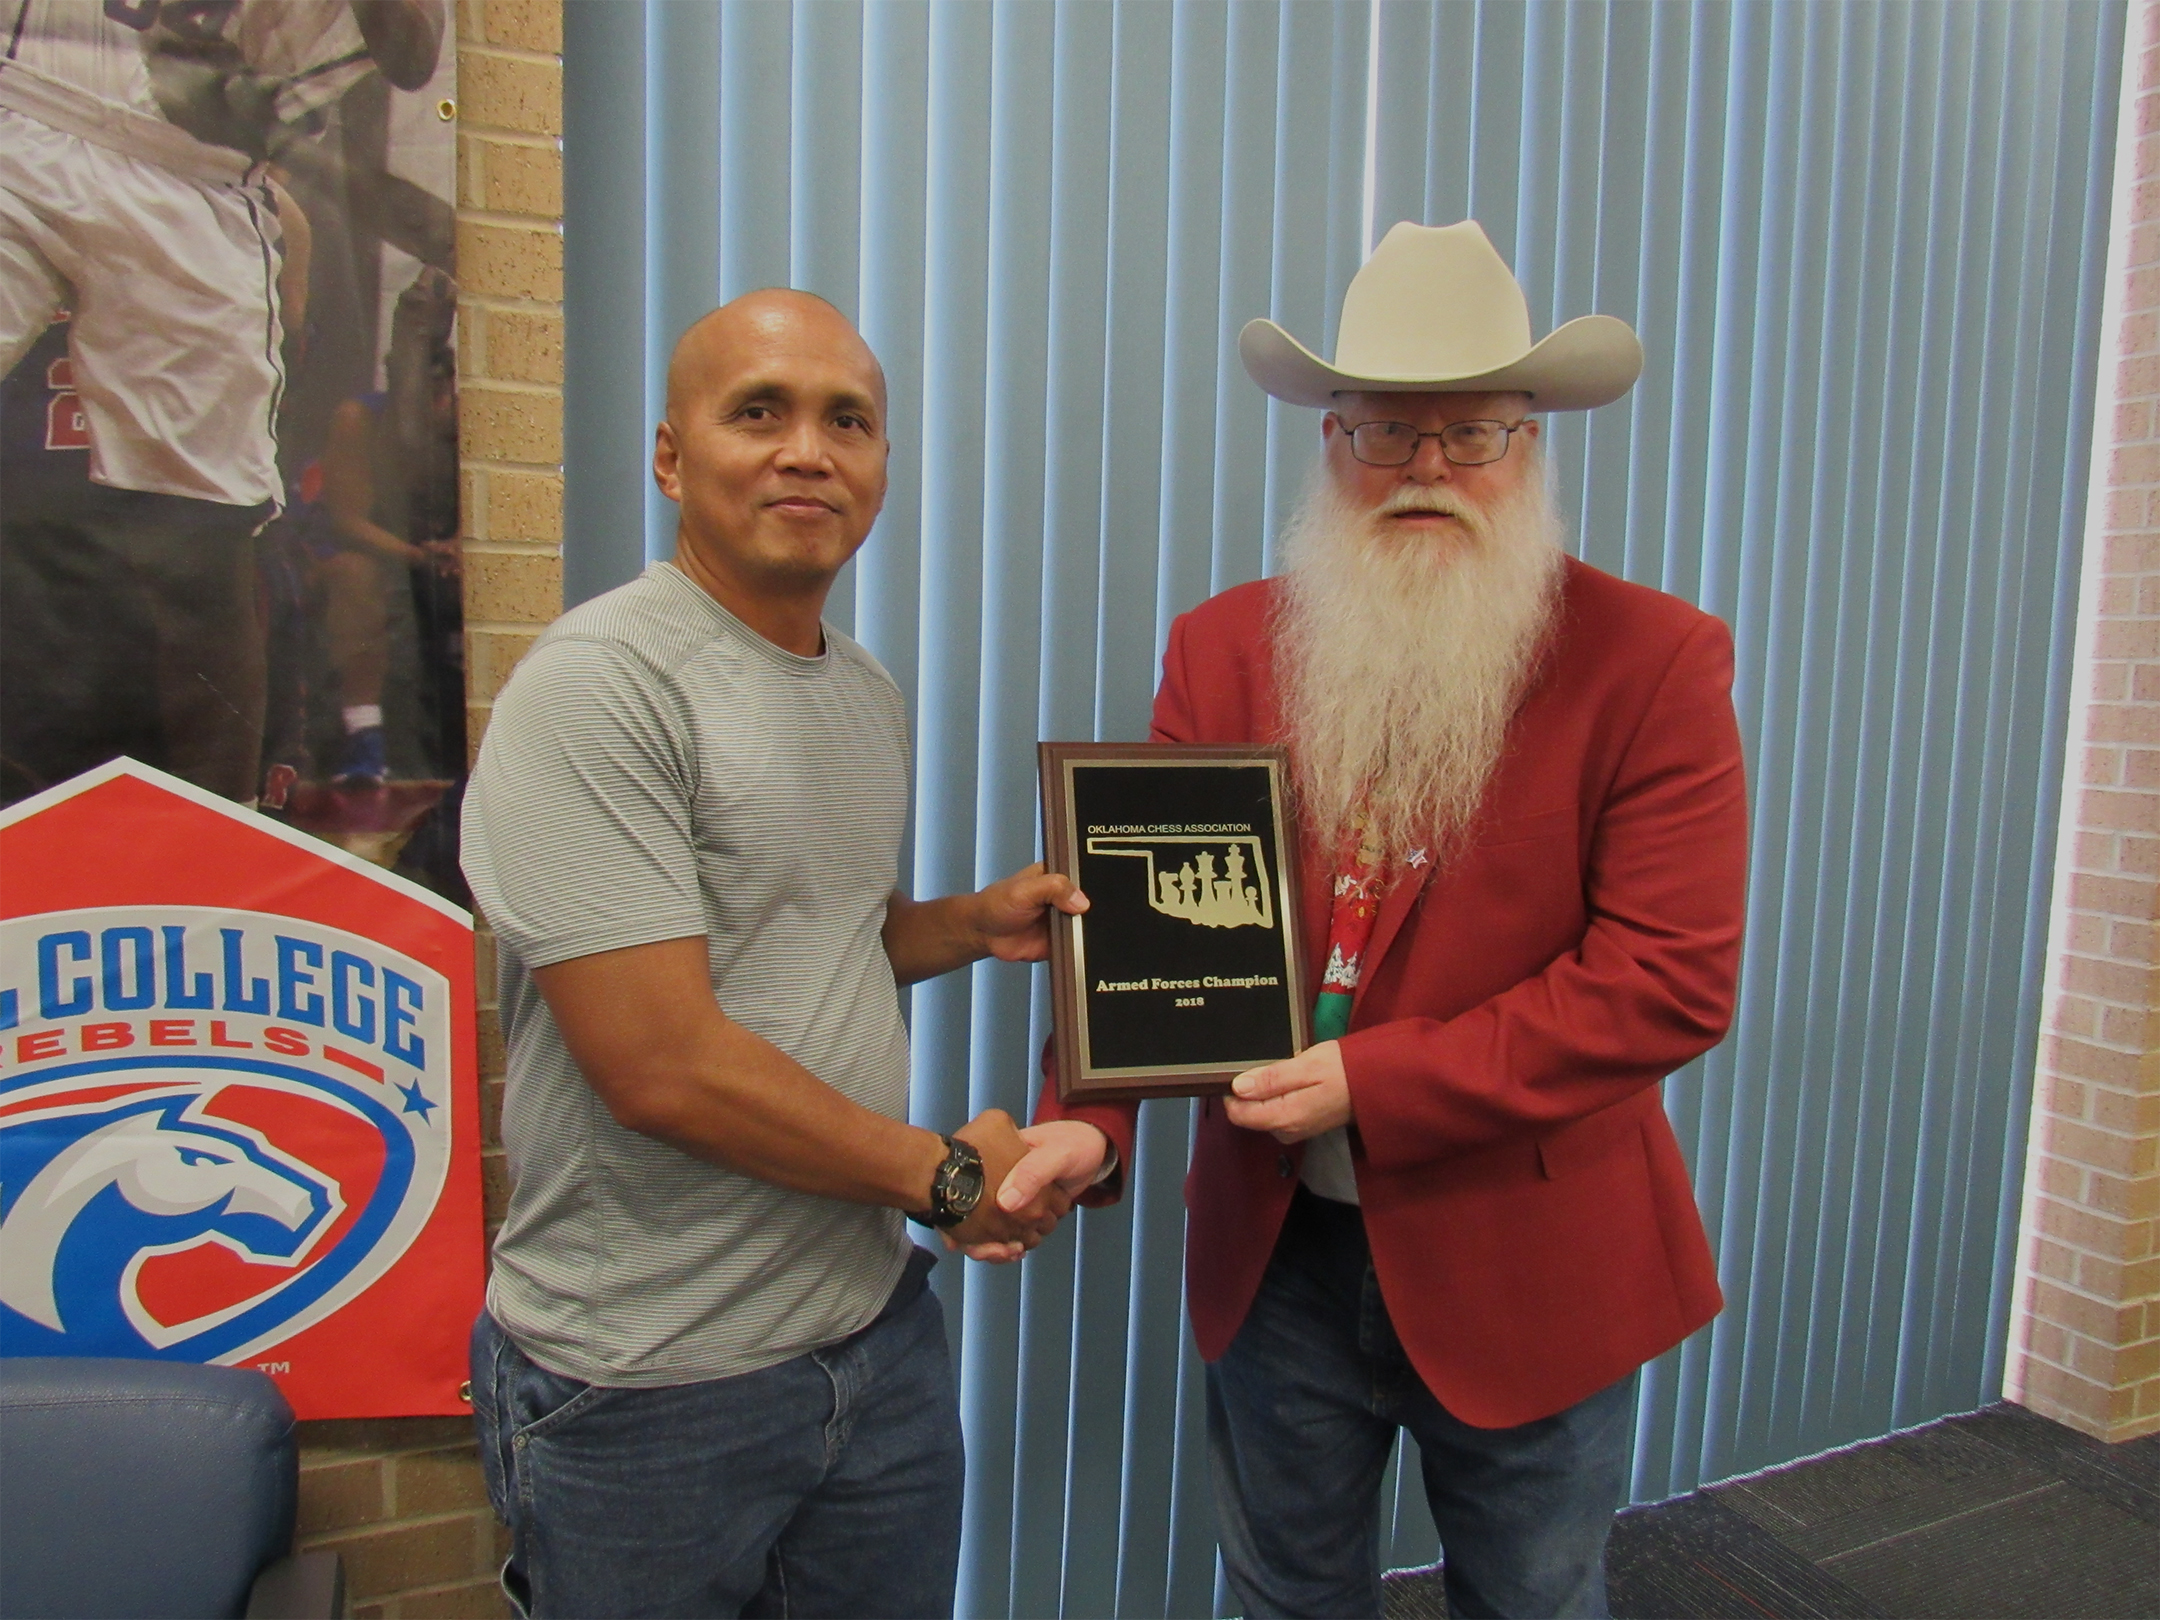 Chess Expert Neal Naputo (left) receives the Oklahoma Armed Forces Champion title and award from Chief Organizer Jim Hollingsworth (right).  Photo by Sheryl McBroom.